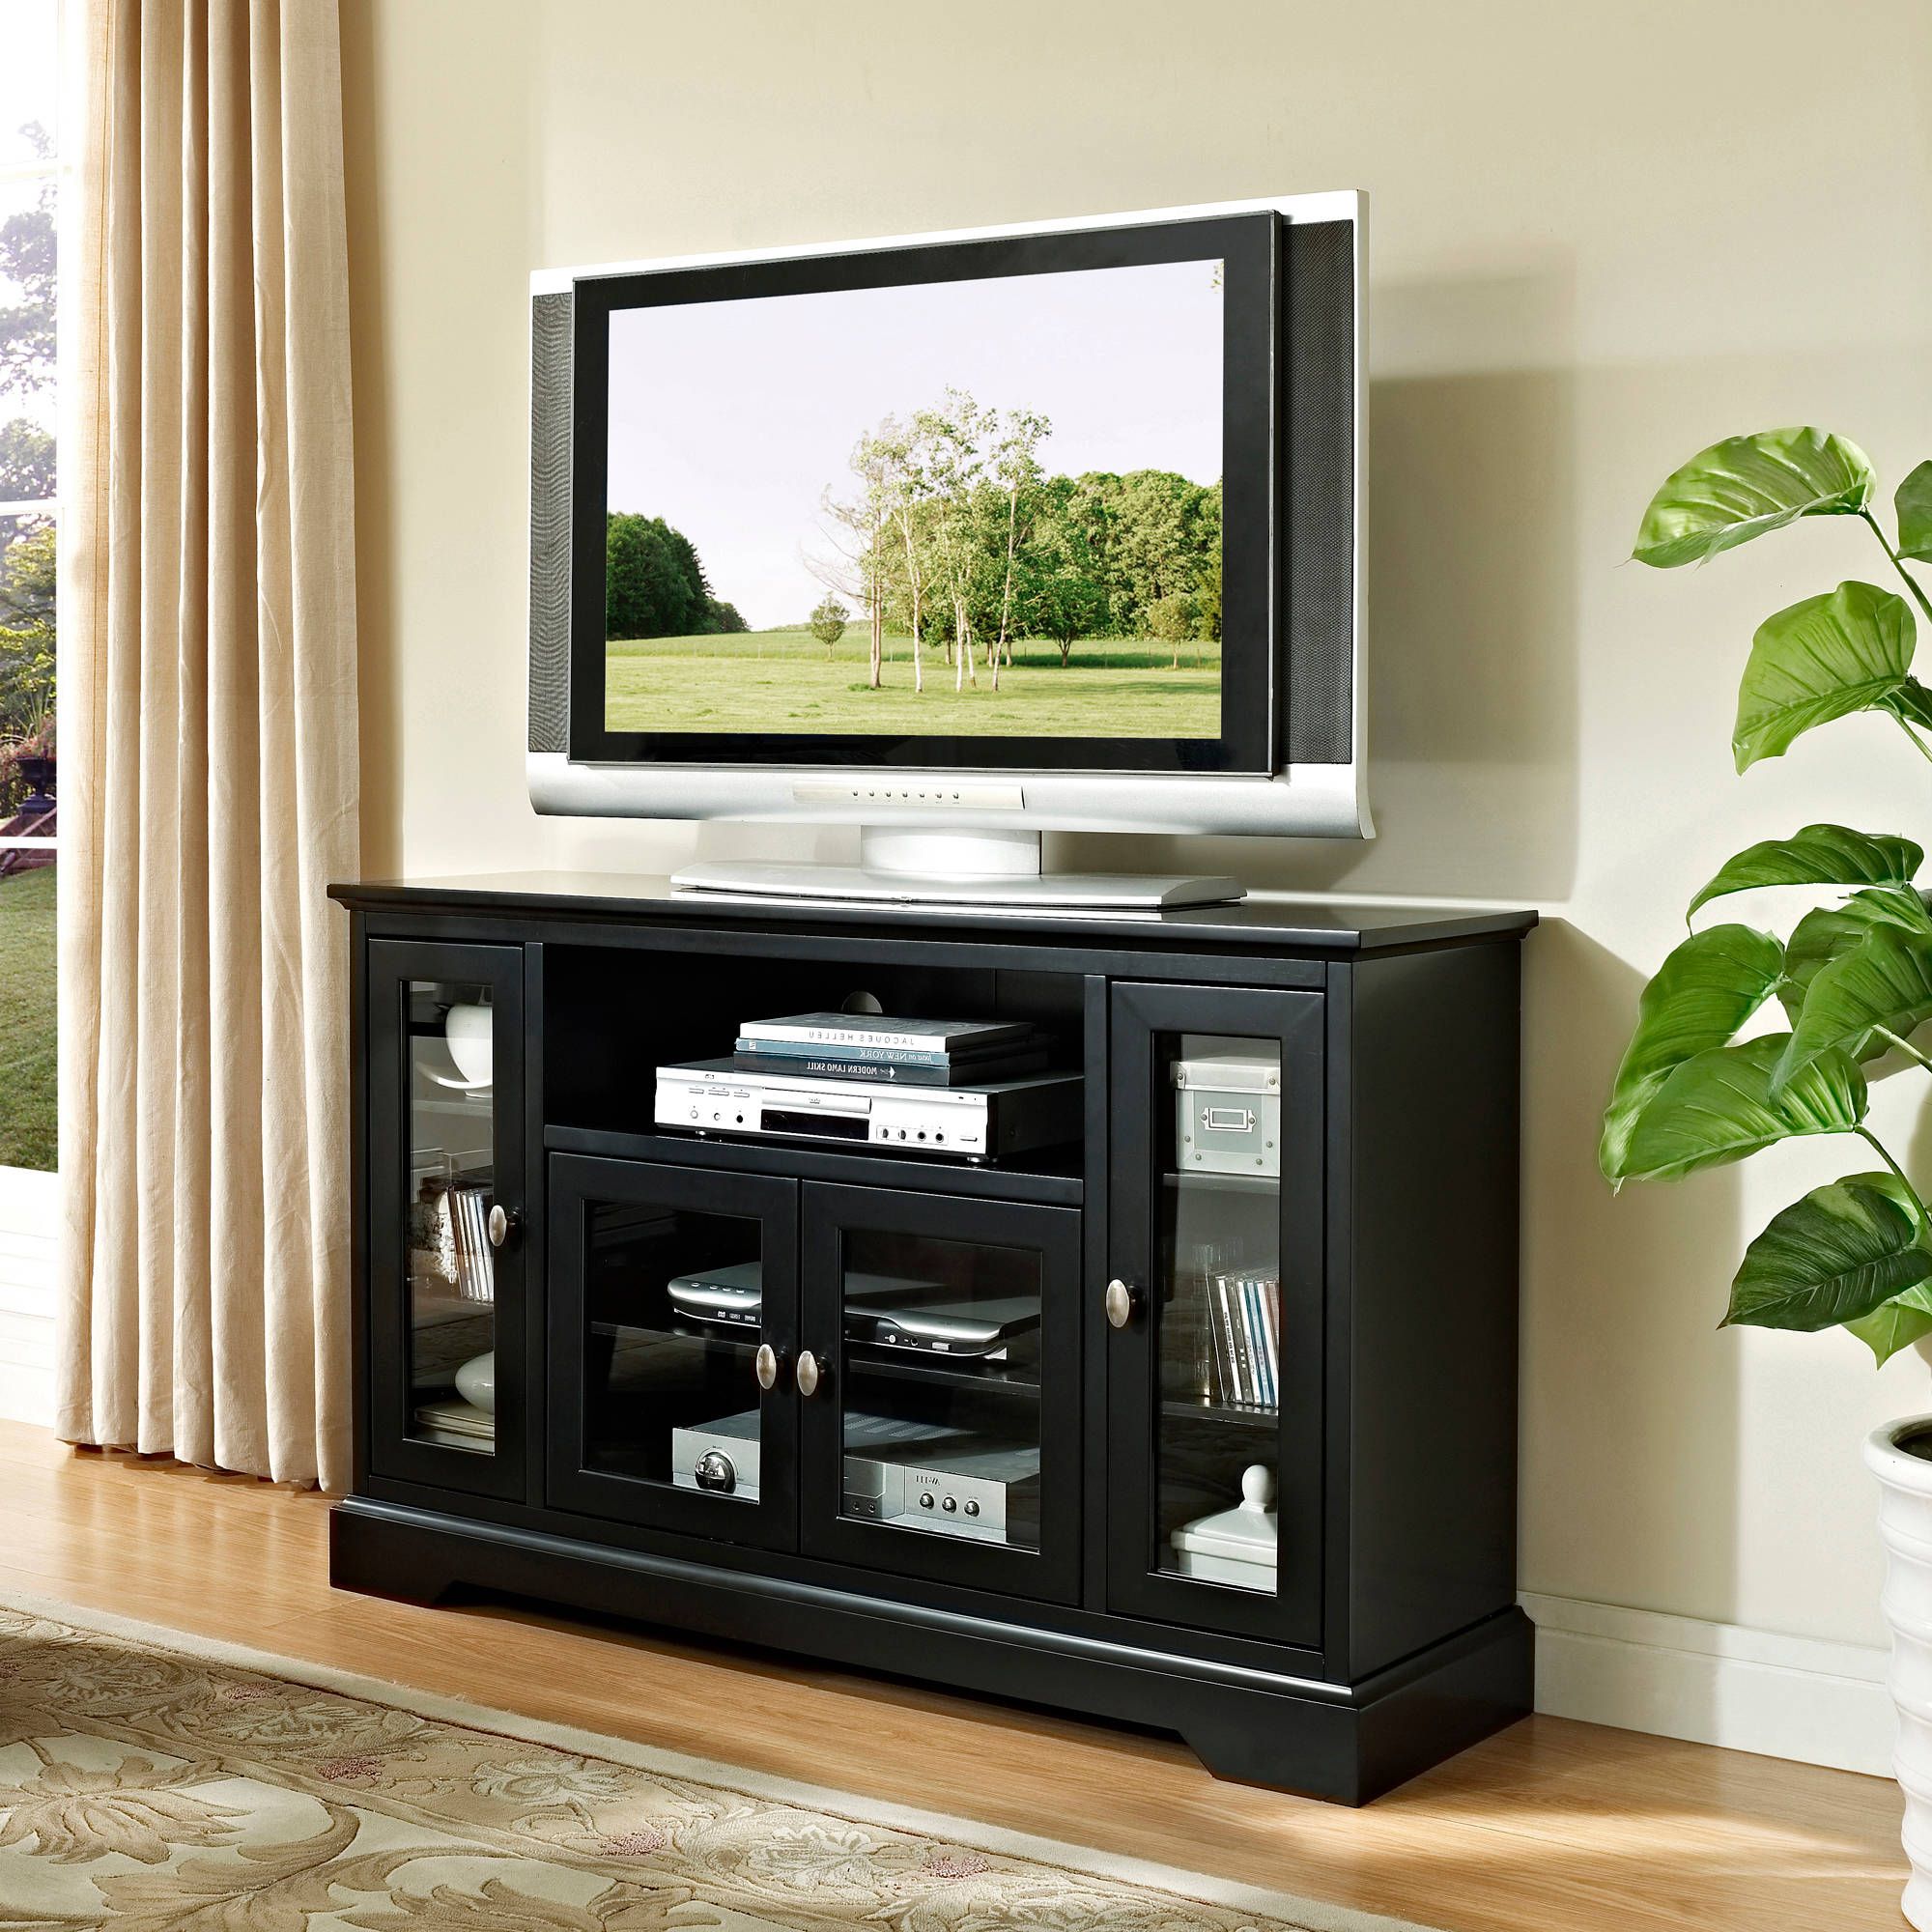 Walker Edison Highboy Style Tv Stand For Tvs Up To 55 Inside Walker Edison Wood Tv Media Storage Stands In Black (Gallery 14 of 20)